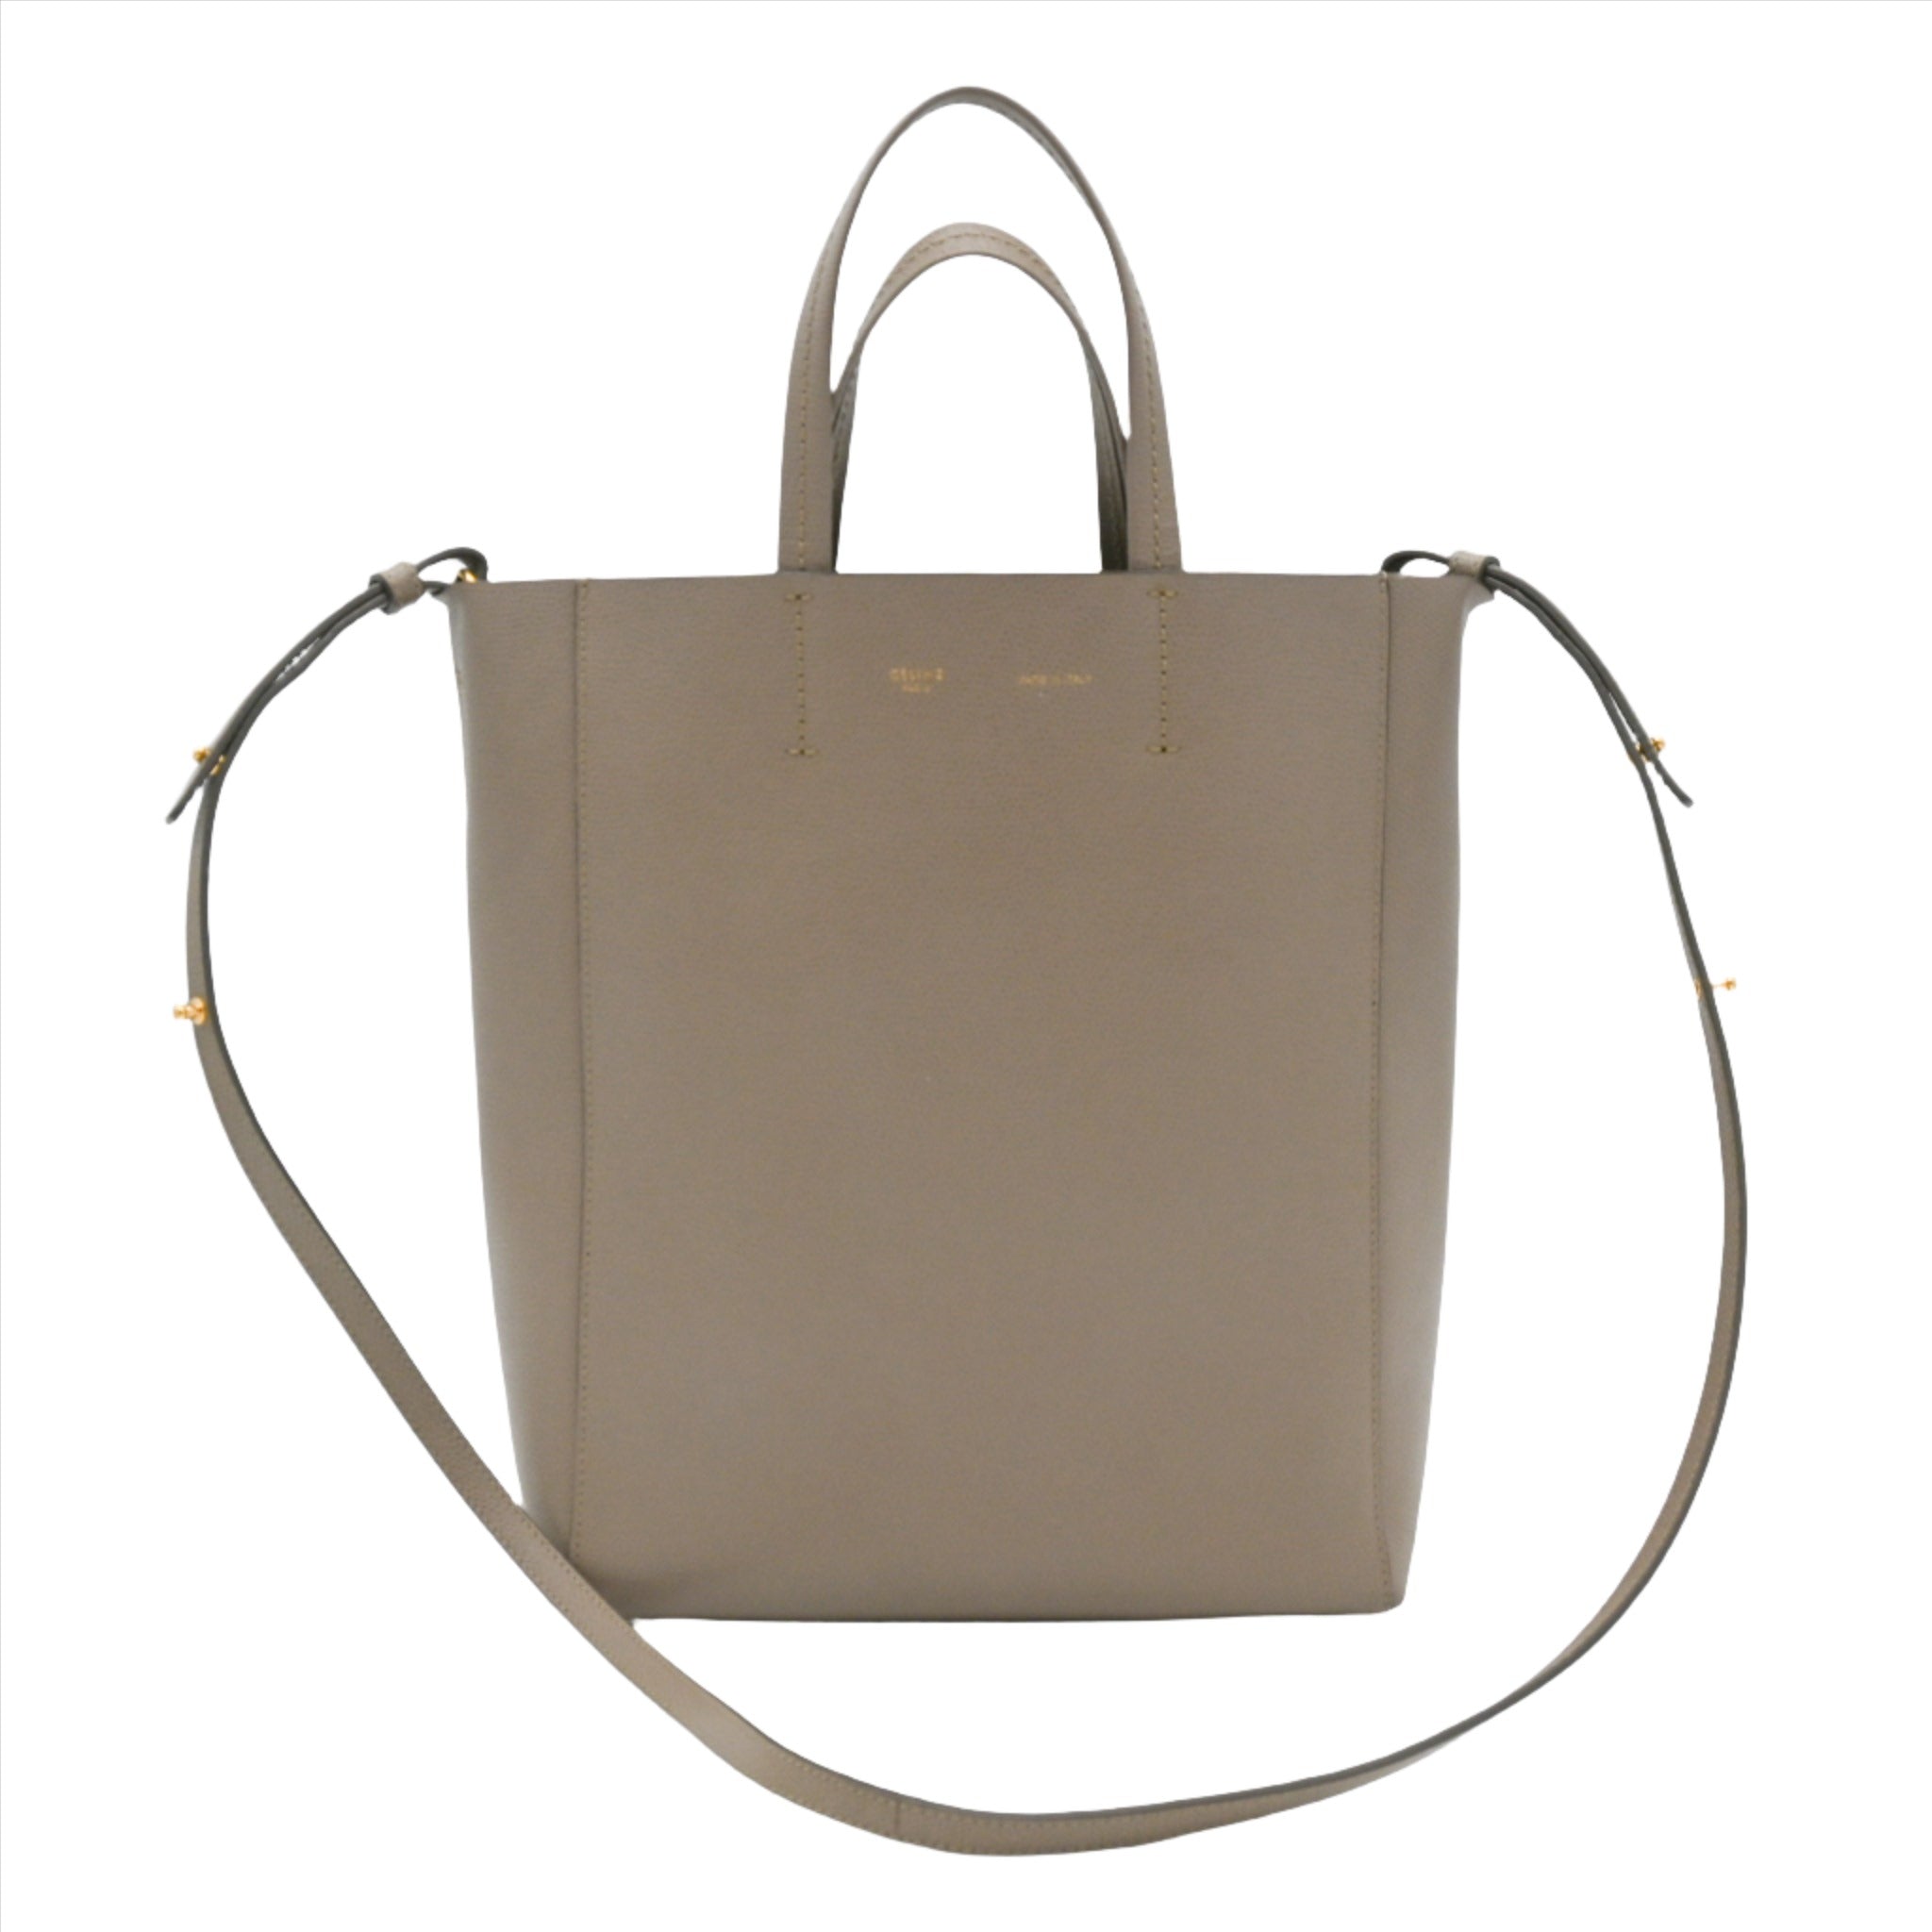 Celine Small Vertical Cabas Leather Bag in Taupe